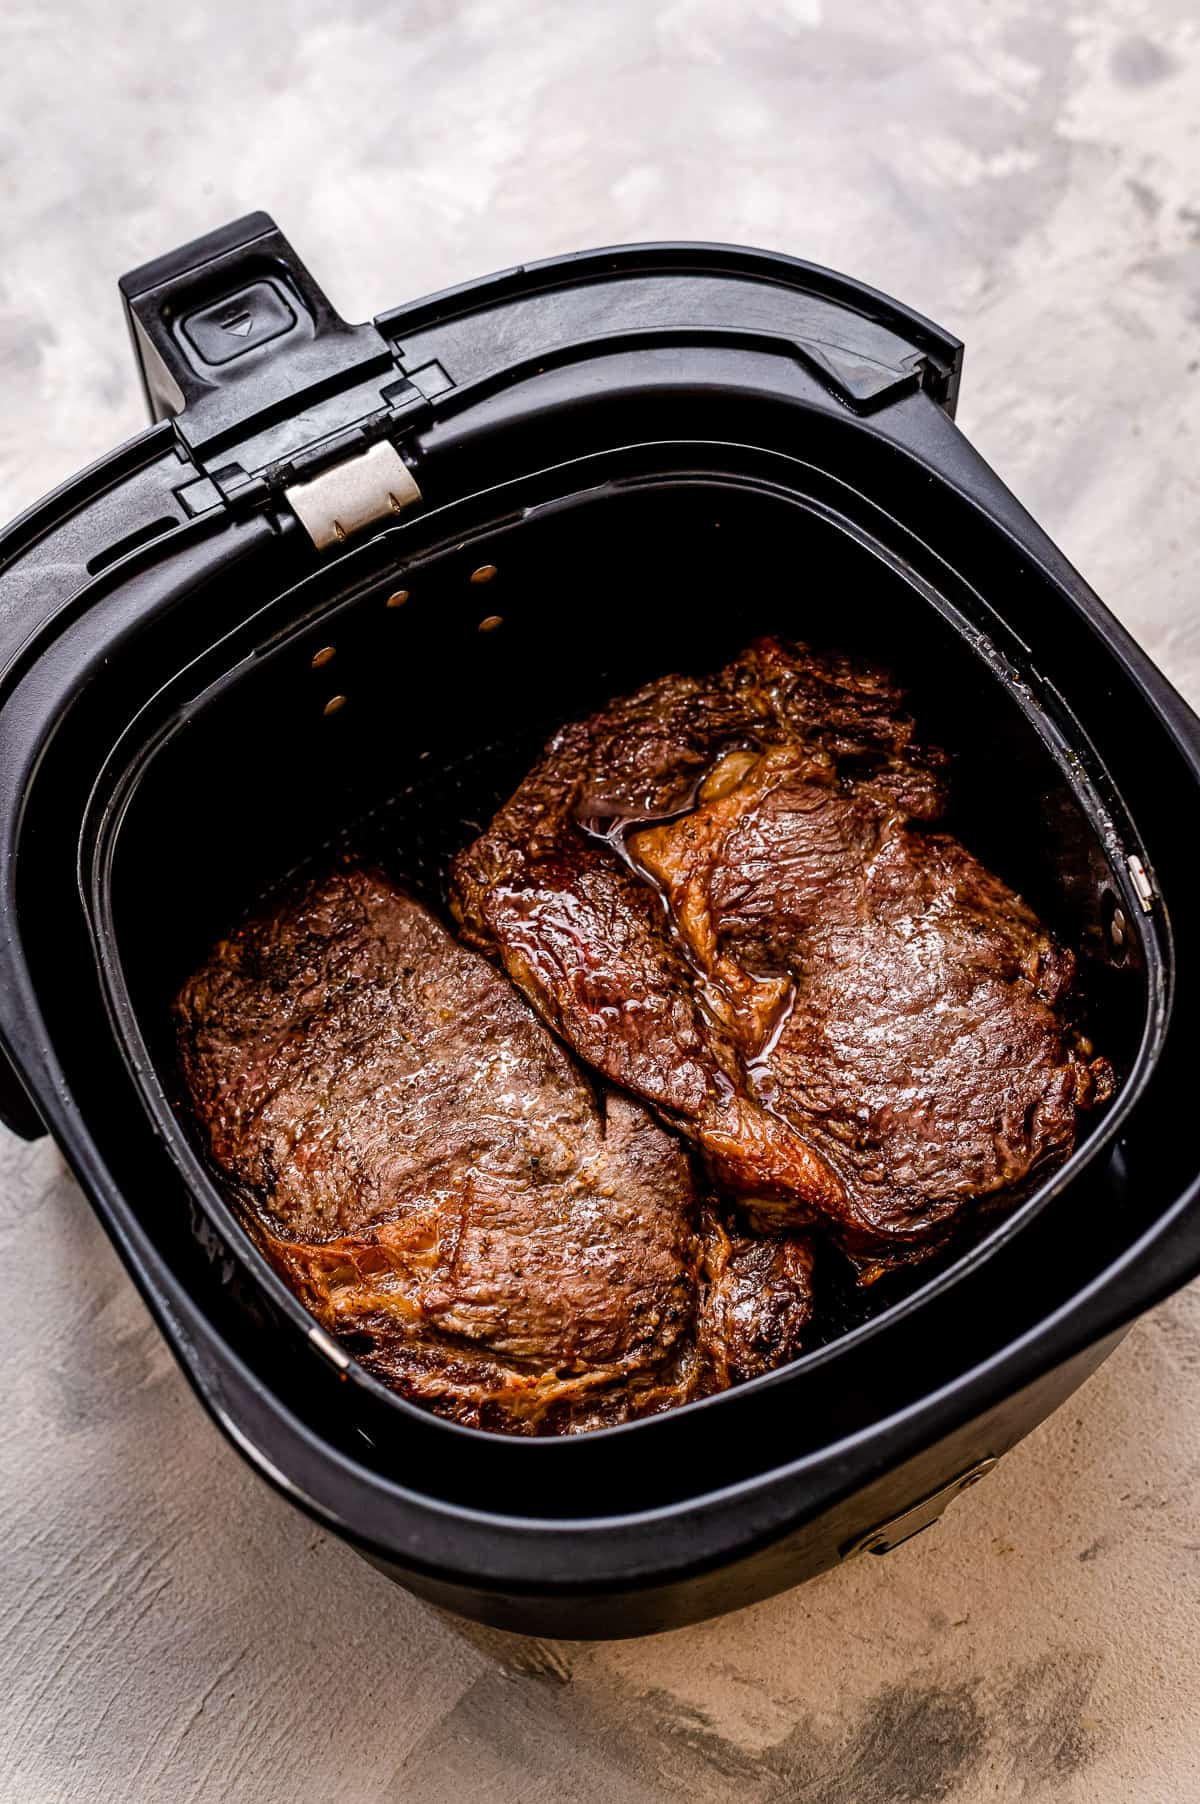 Air Fryer basked with cooked steaks in it